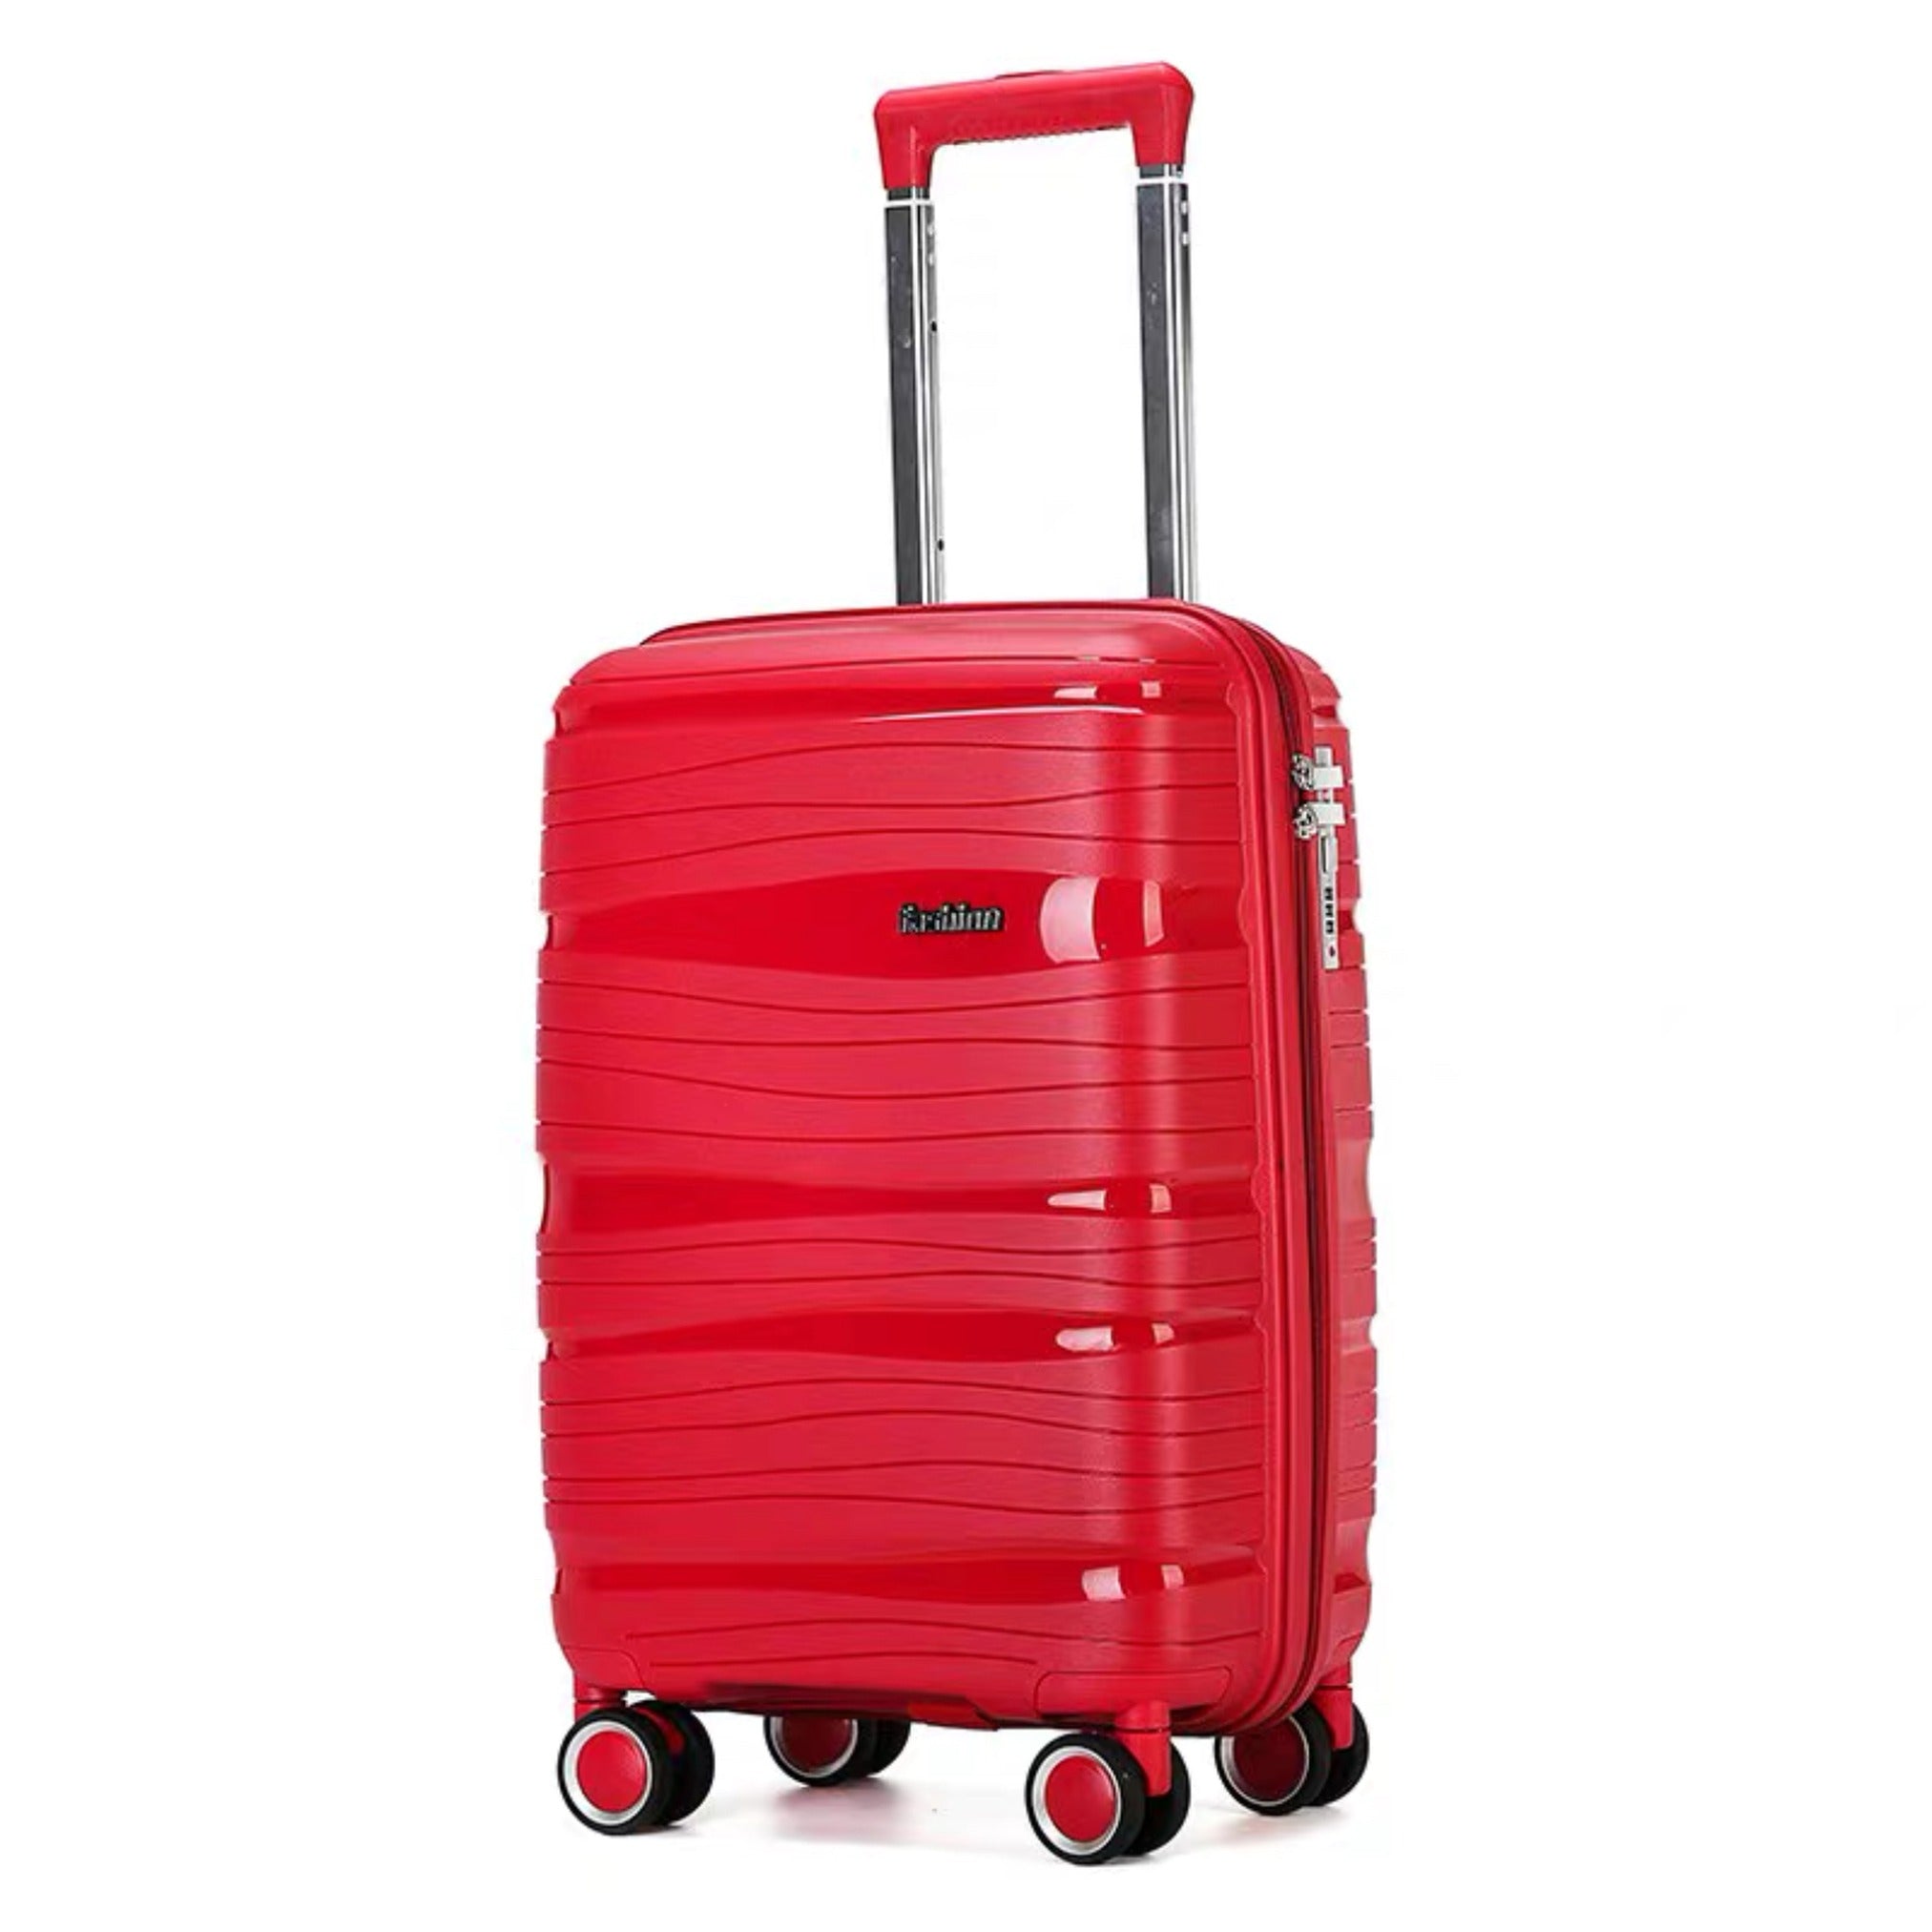 20" Red Colour Royal PP Luggage Lightweight Hard Case Carry On Trolley Bag with Double Spinner Wheel